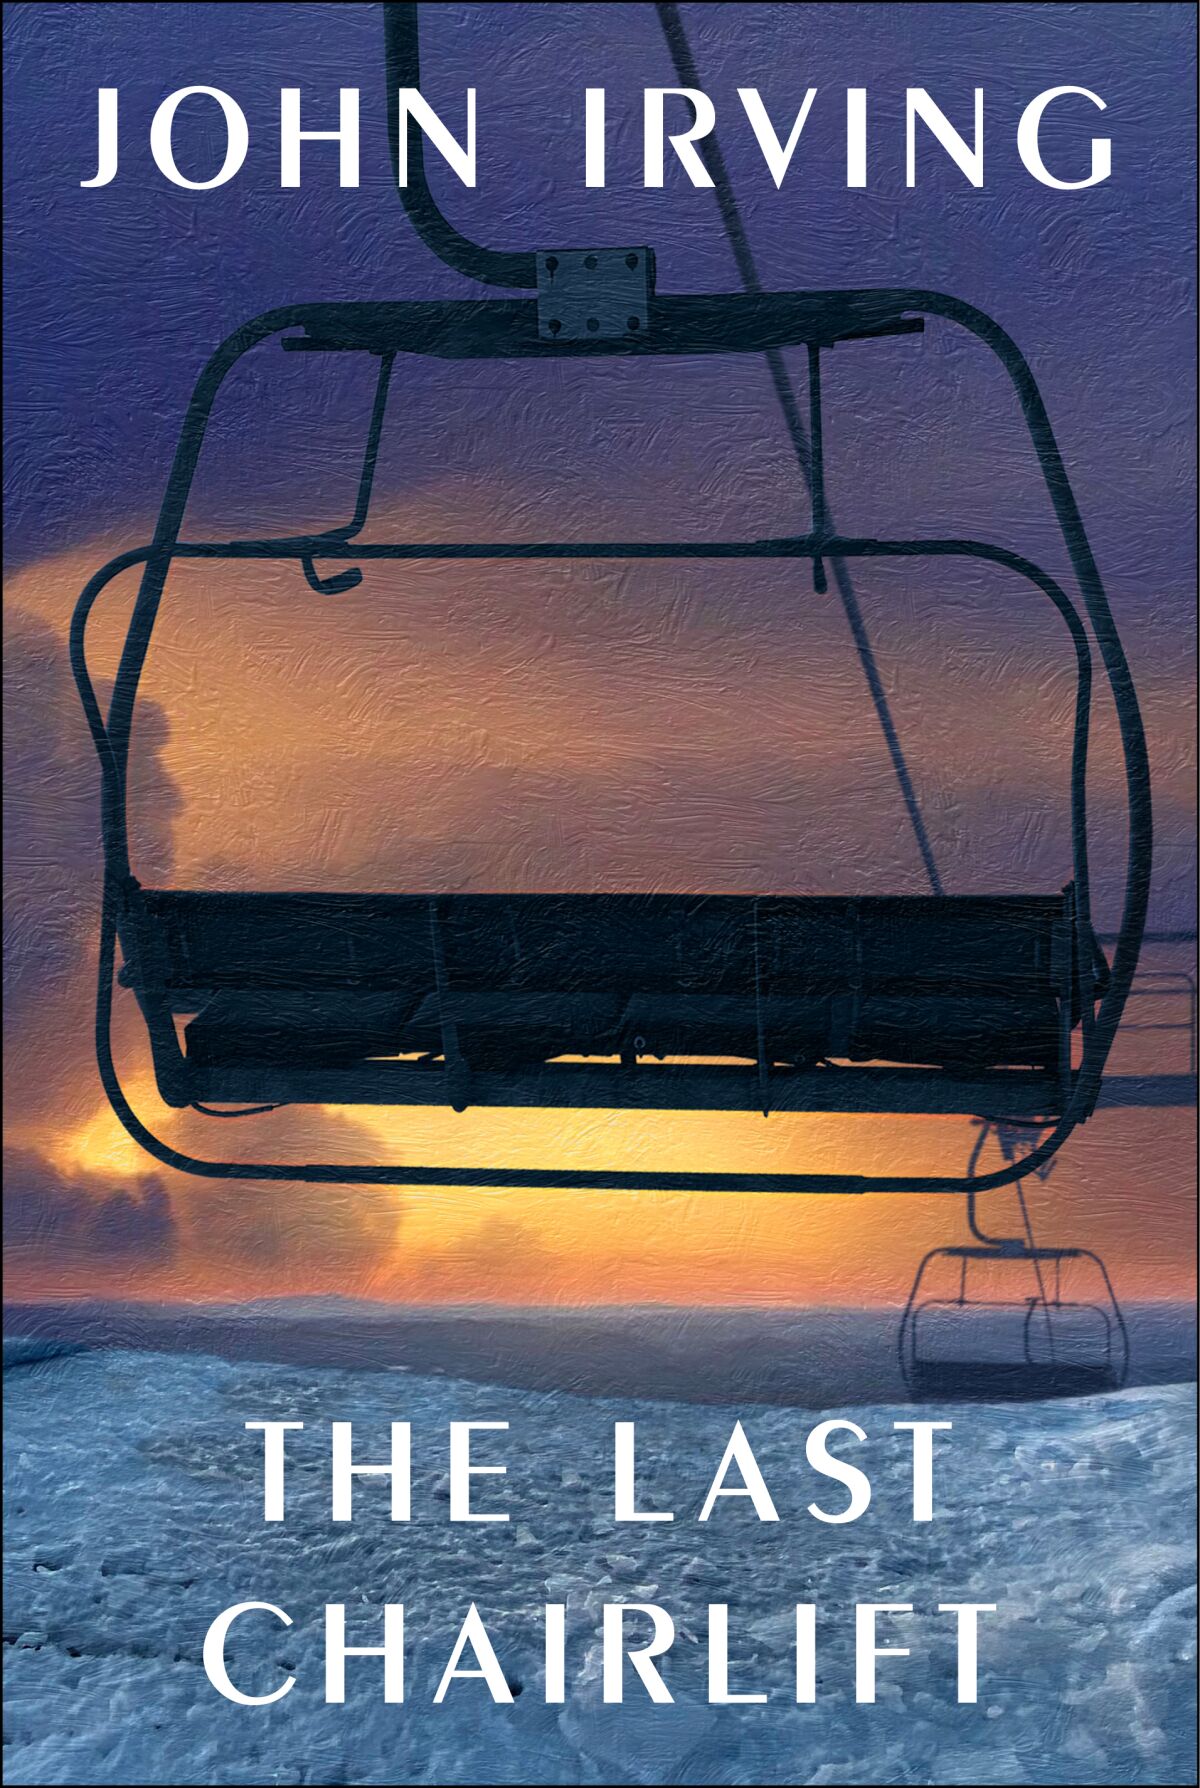 The cover of "The Last Chairlift," containing a photo of an empty chairlift chair in waning light.